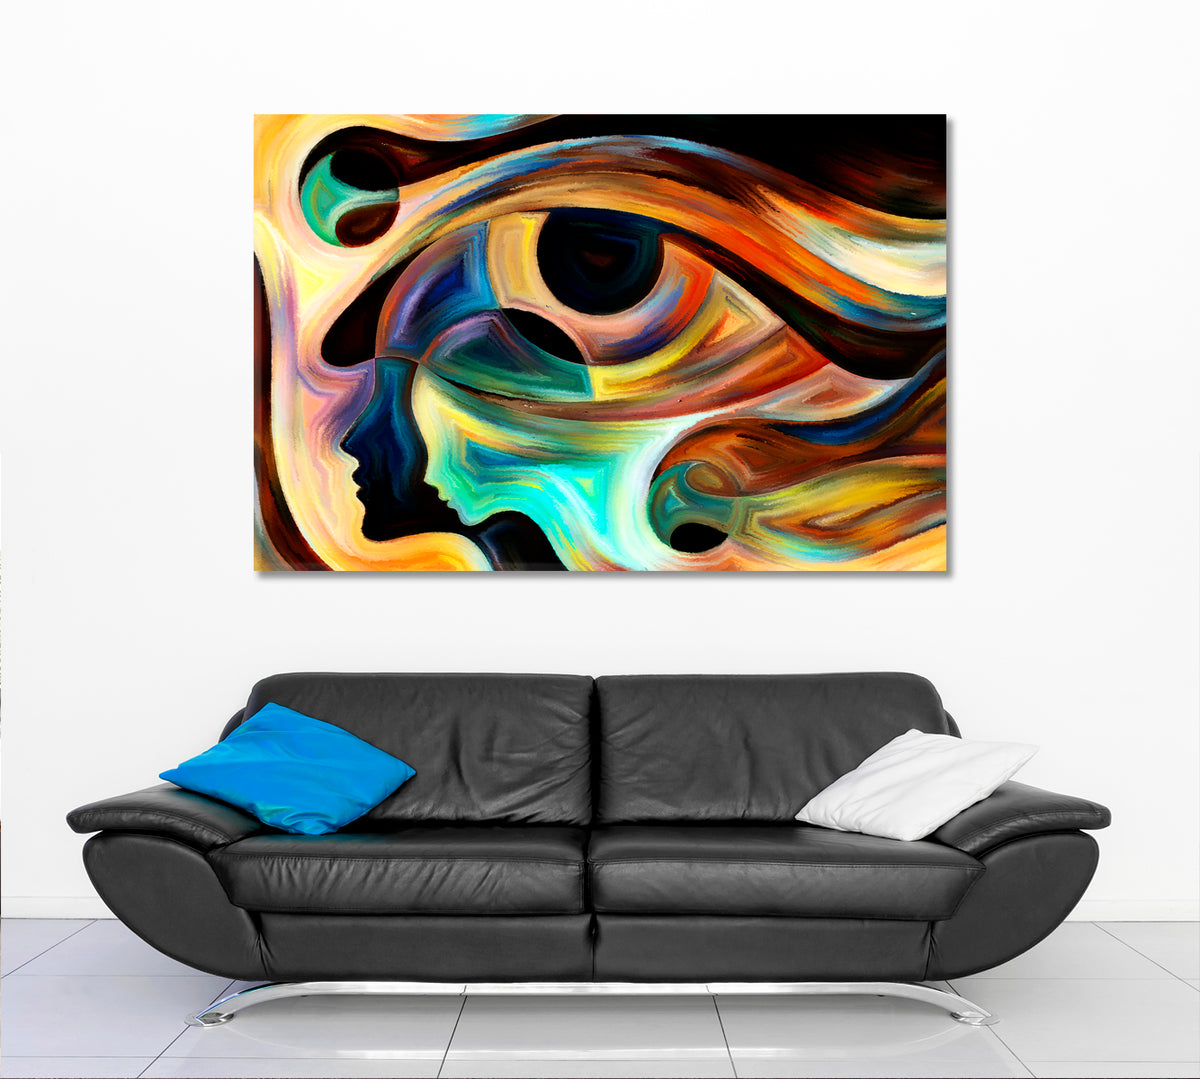 Woman and Child Human Eye Abstract Beautiful Lines Consciousness Art Artesty 1 panel 24" x 16" 